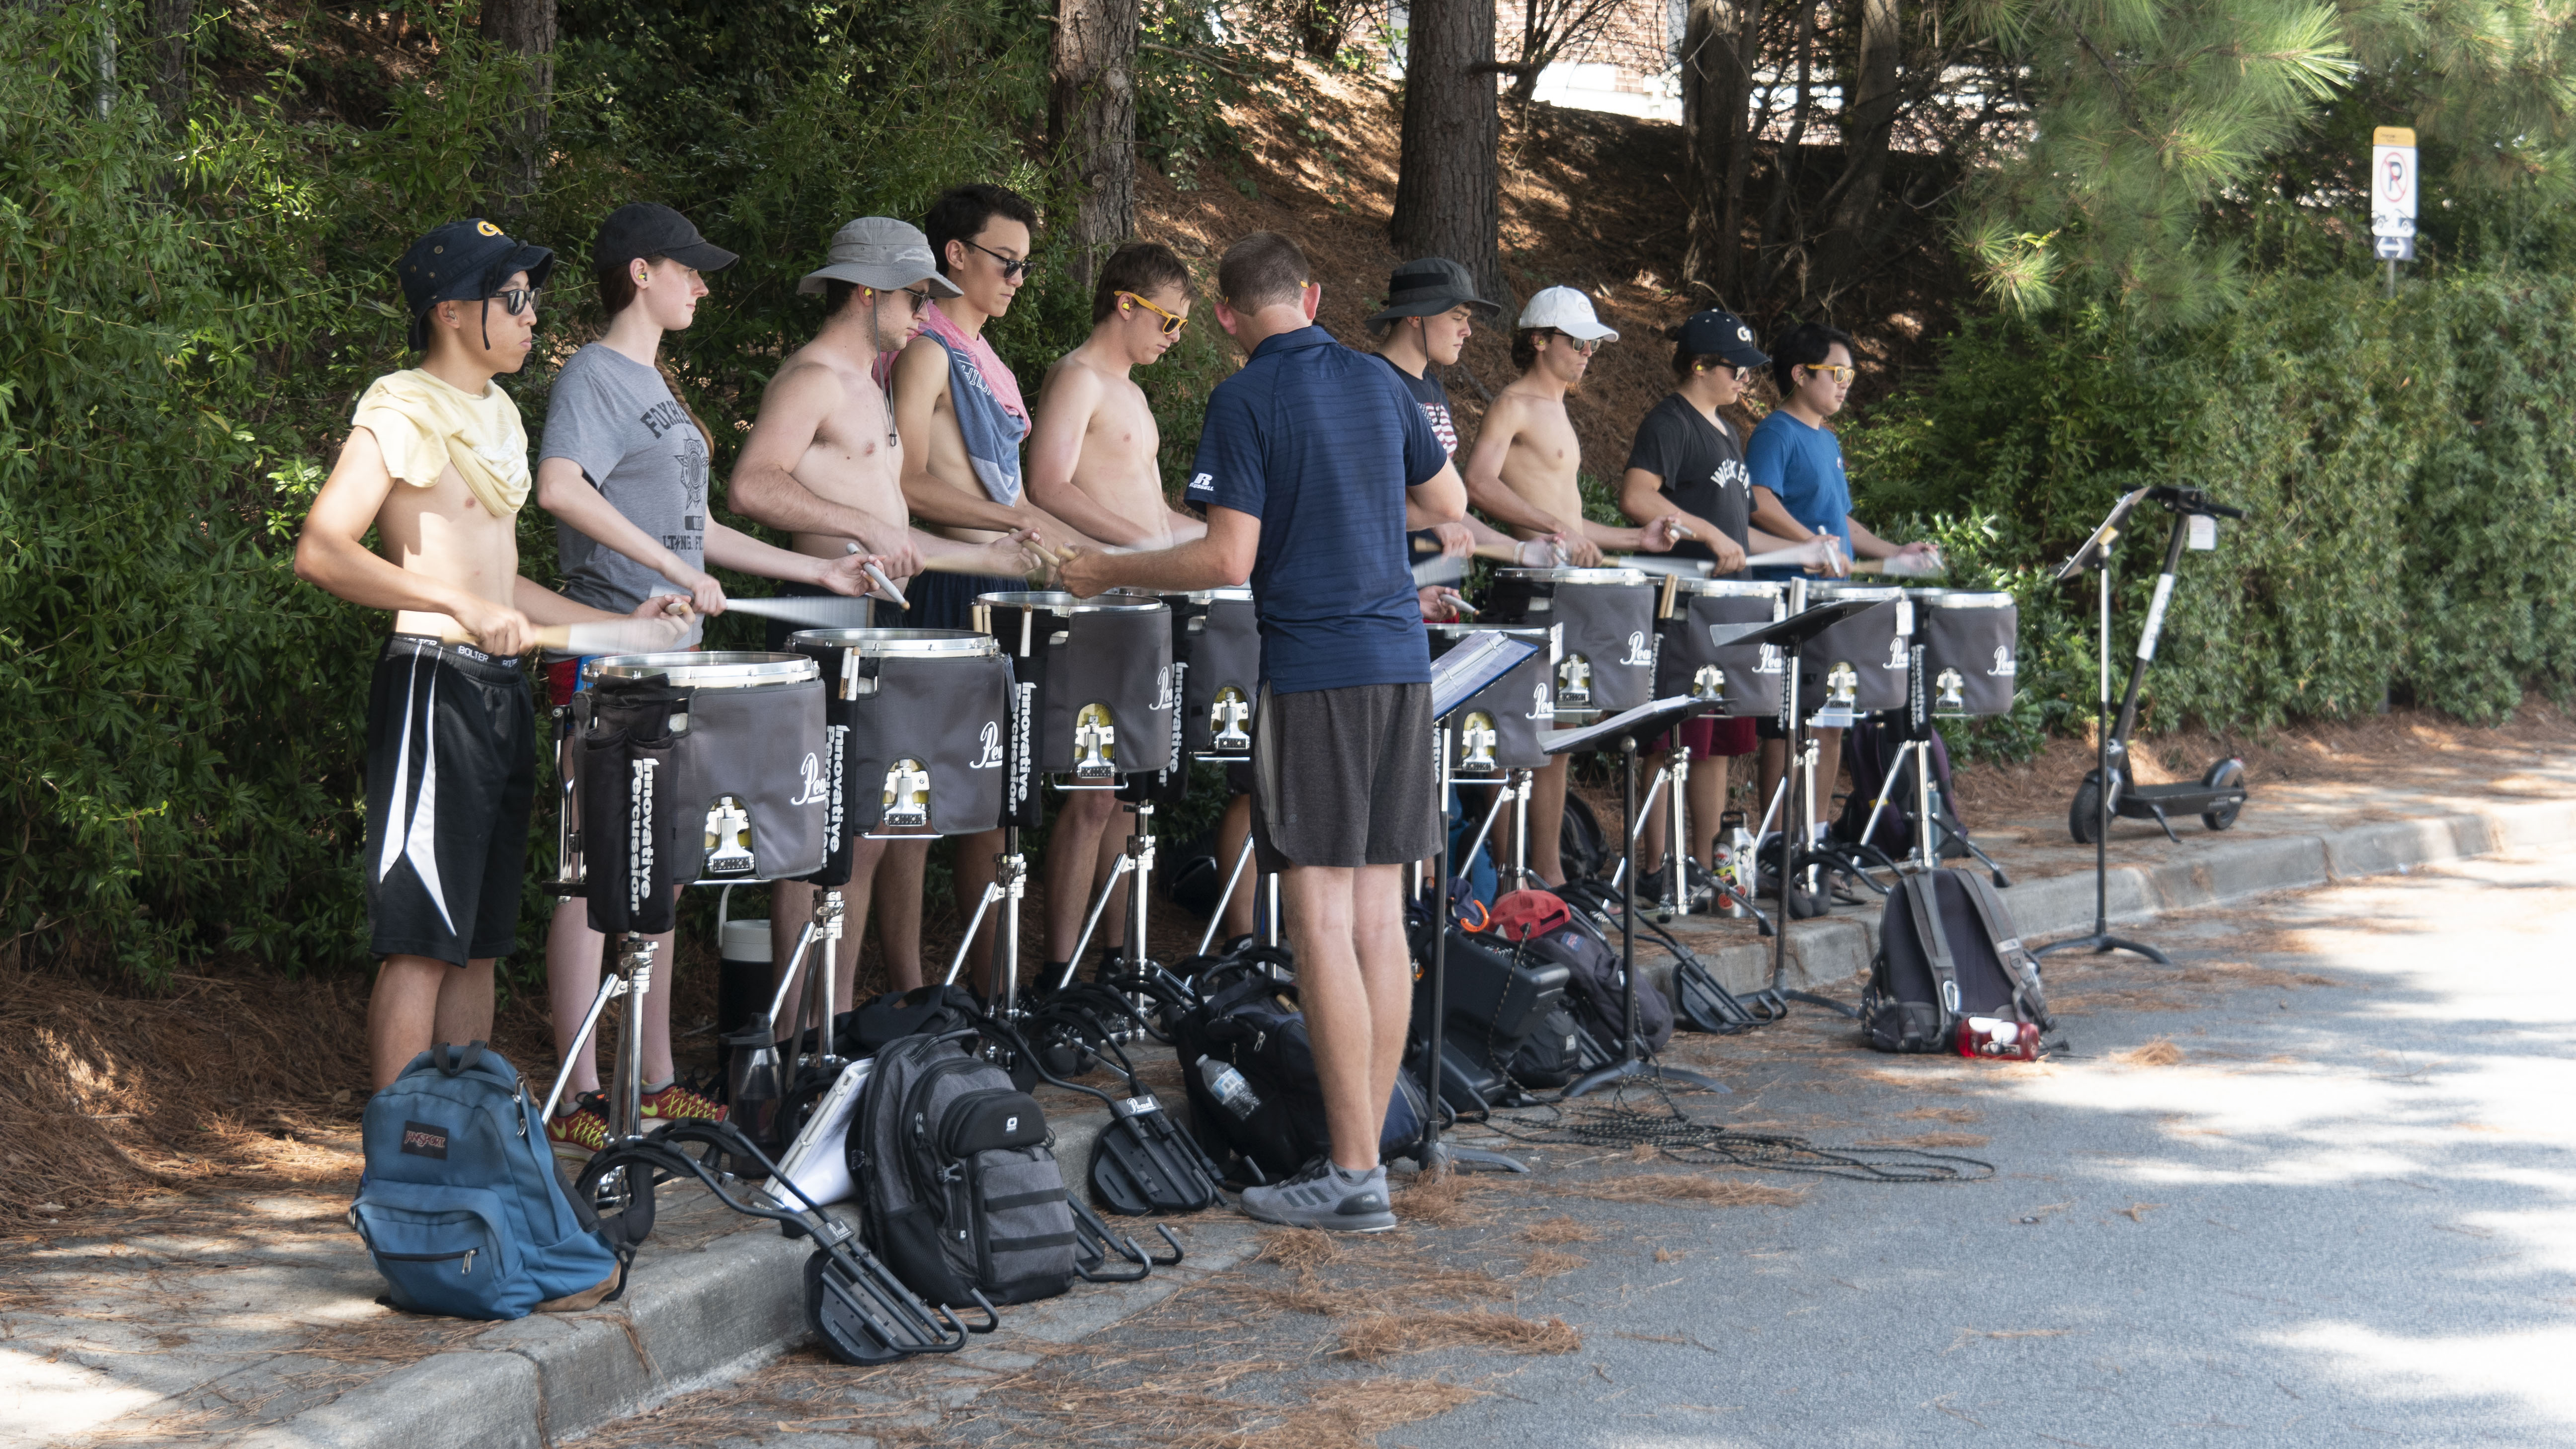 Members of the drumline practicing at camp.